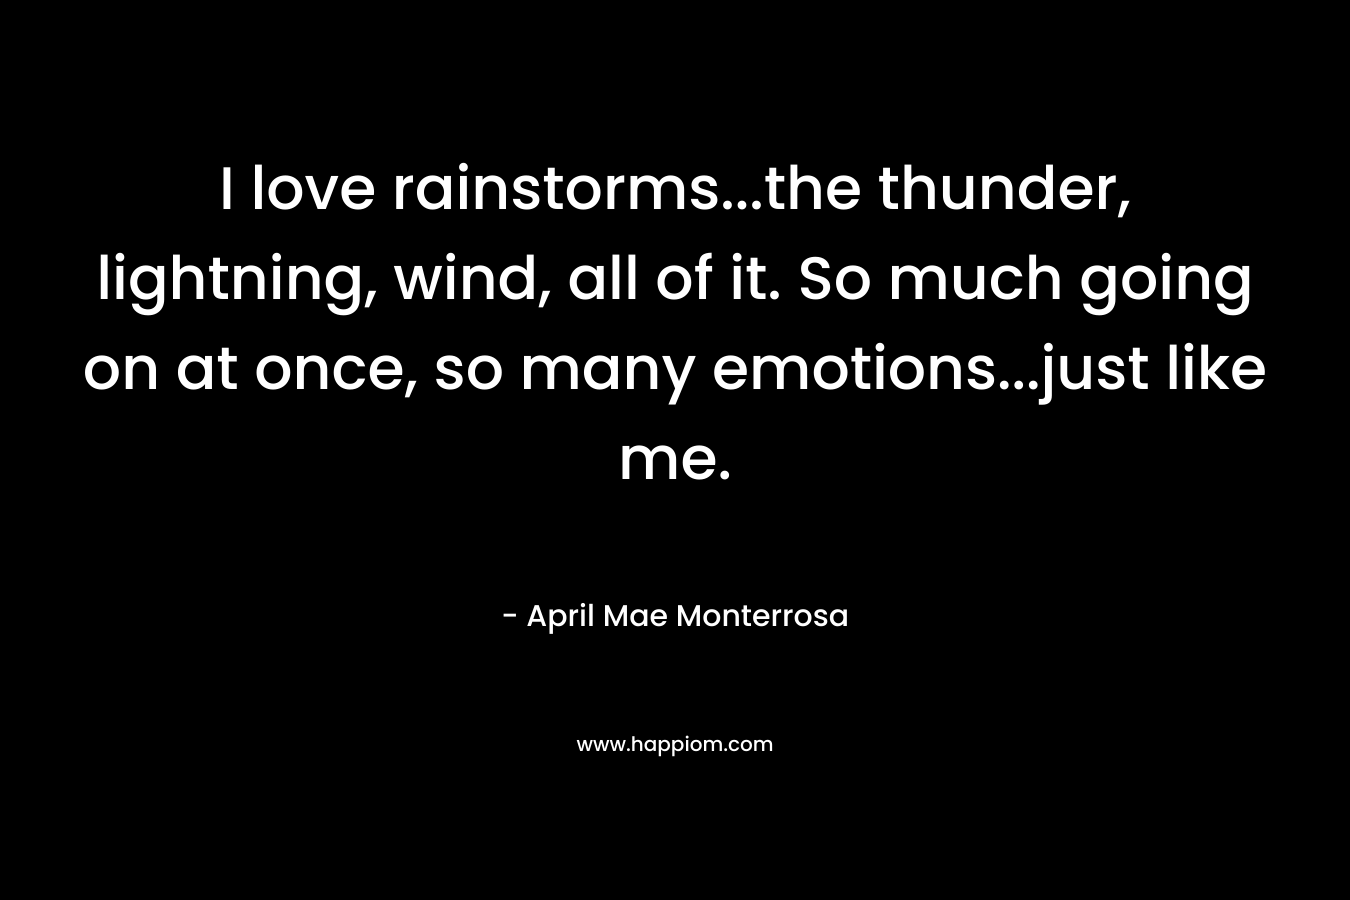 I love rainstorms...the thunder, lightning, wind, all of it. So much going on at once, so many emotions...just like me.